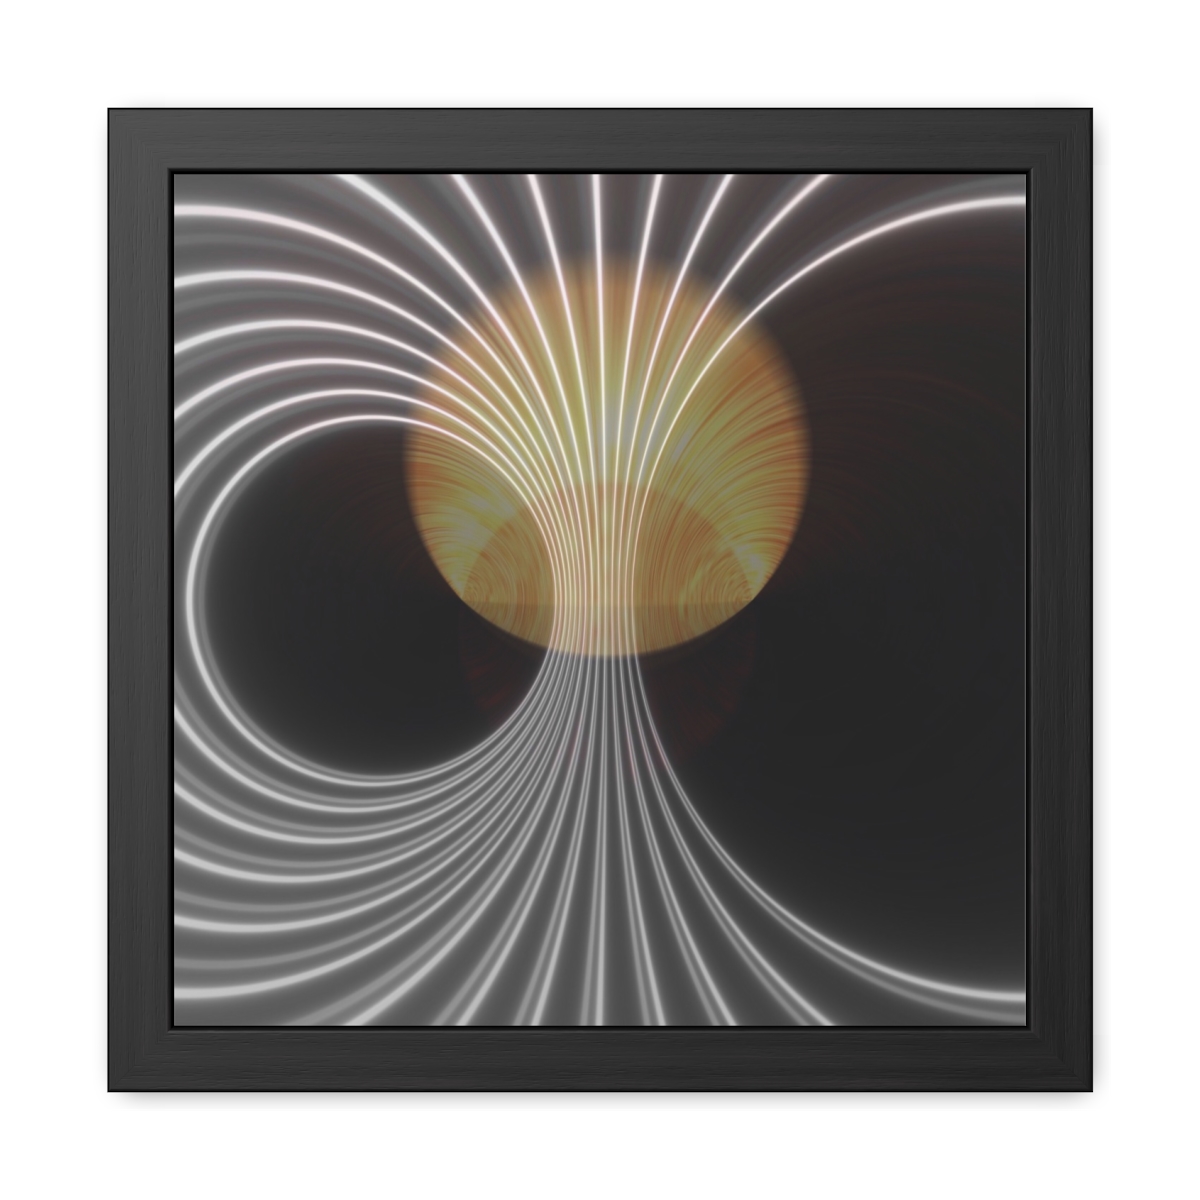 Abstract Geometric Art | LE 1590

artandpicturesforhotels.com/shop/geometric…

#Original #Abstract #Geometric #LimitedEdition #abstractart #originalart #Geometricart #artforhotels #artforhospitatlity #ArtforSale #artandpictures #CollectableArt